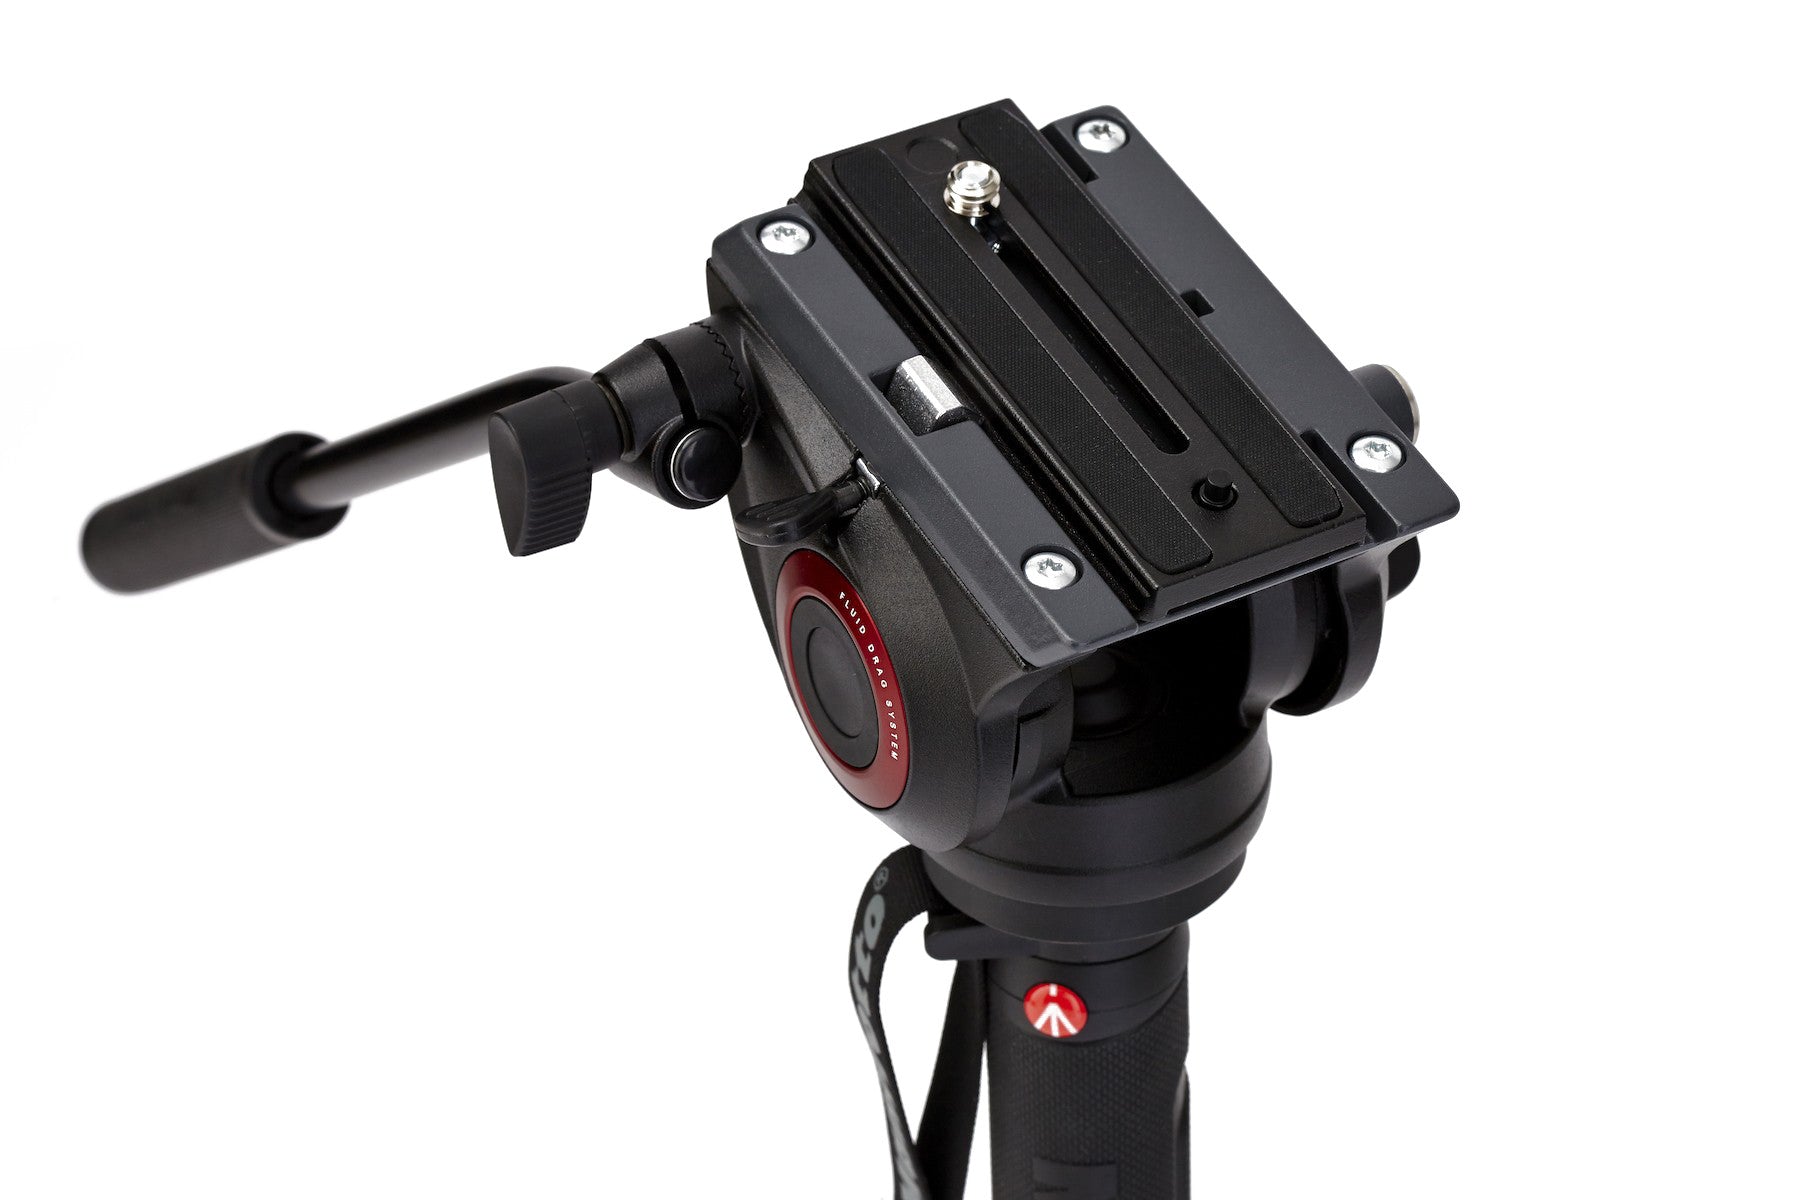 Manfrotto Video MVMXPRO500US Xpro Aluminum Video Monopod with 500 Series Video Head, tripods video monopods, Manfrotto - Pictureline  - 6